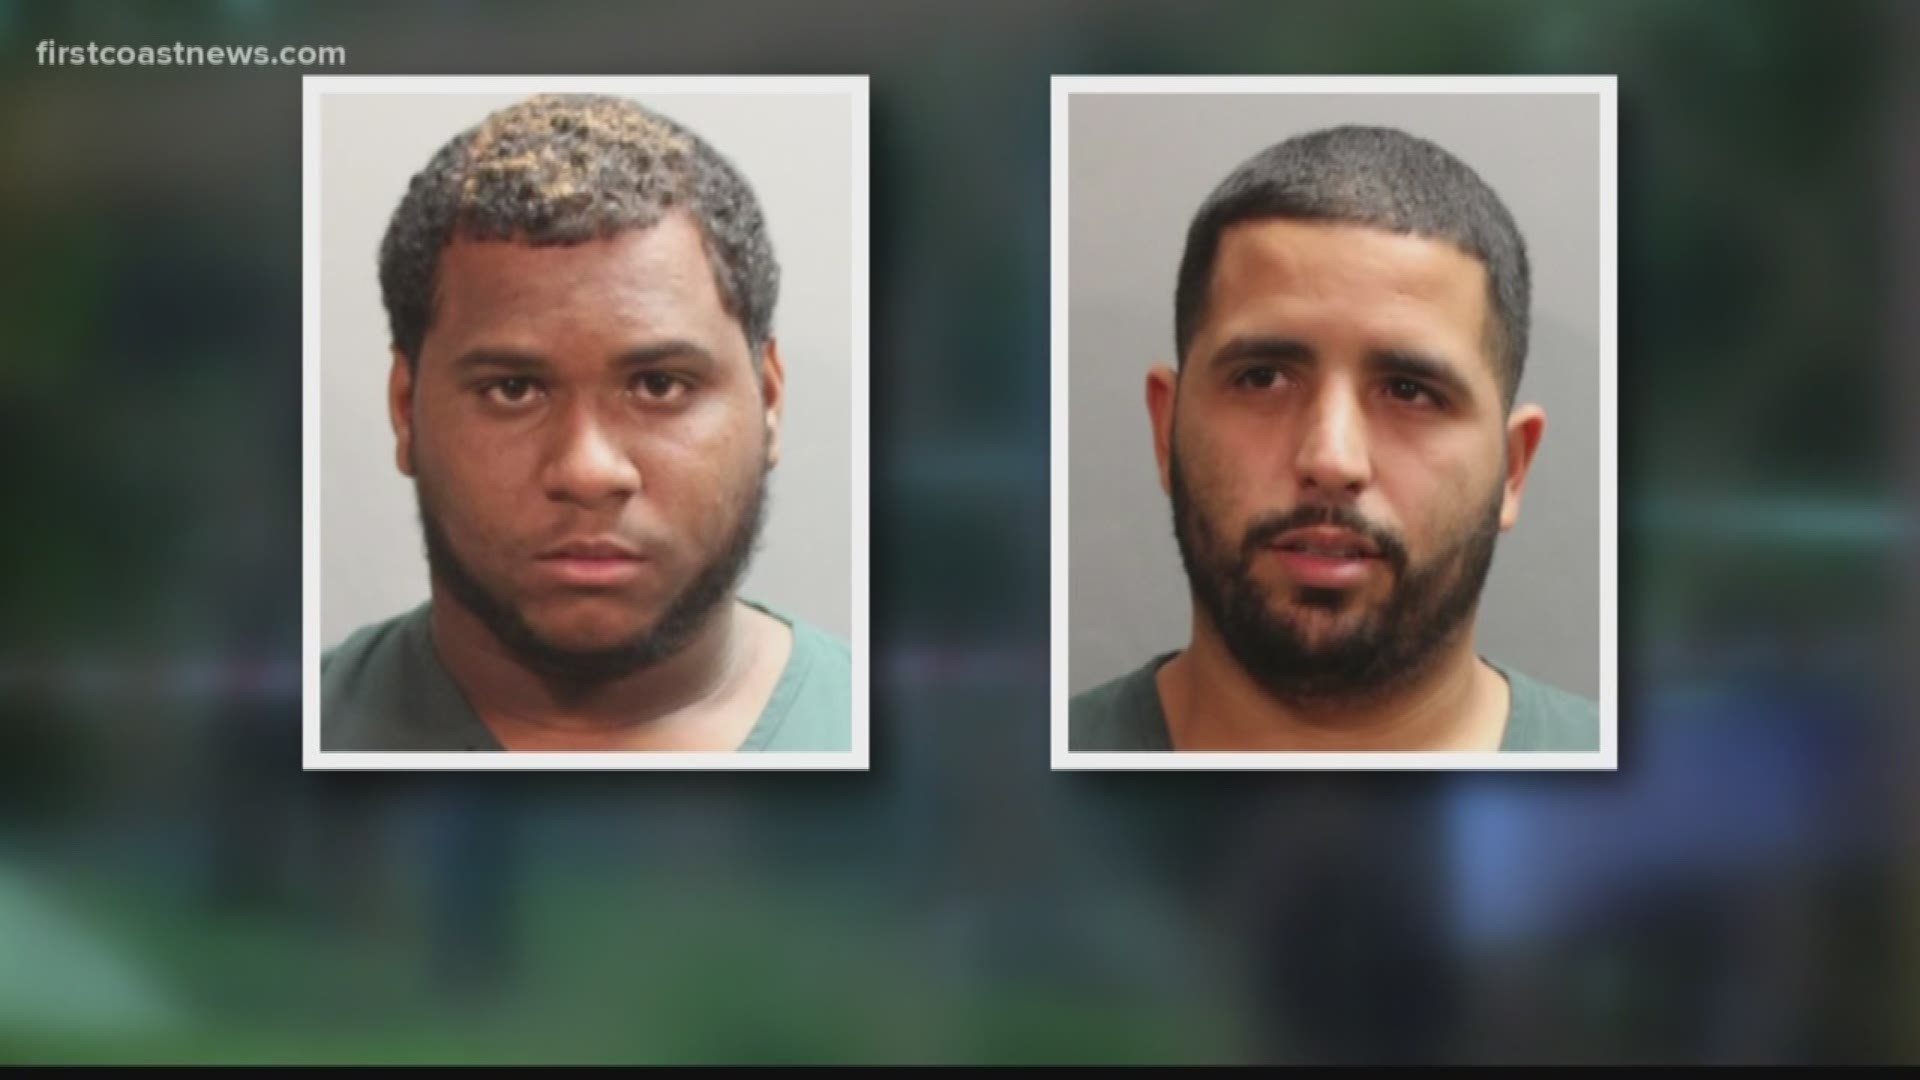 Two men were arrested Friday after police say they swiped envelopes containing credit cards off porches in an Atlantic Beach neighborhood.